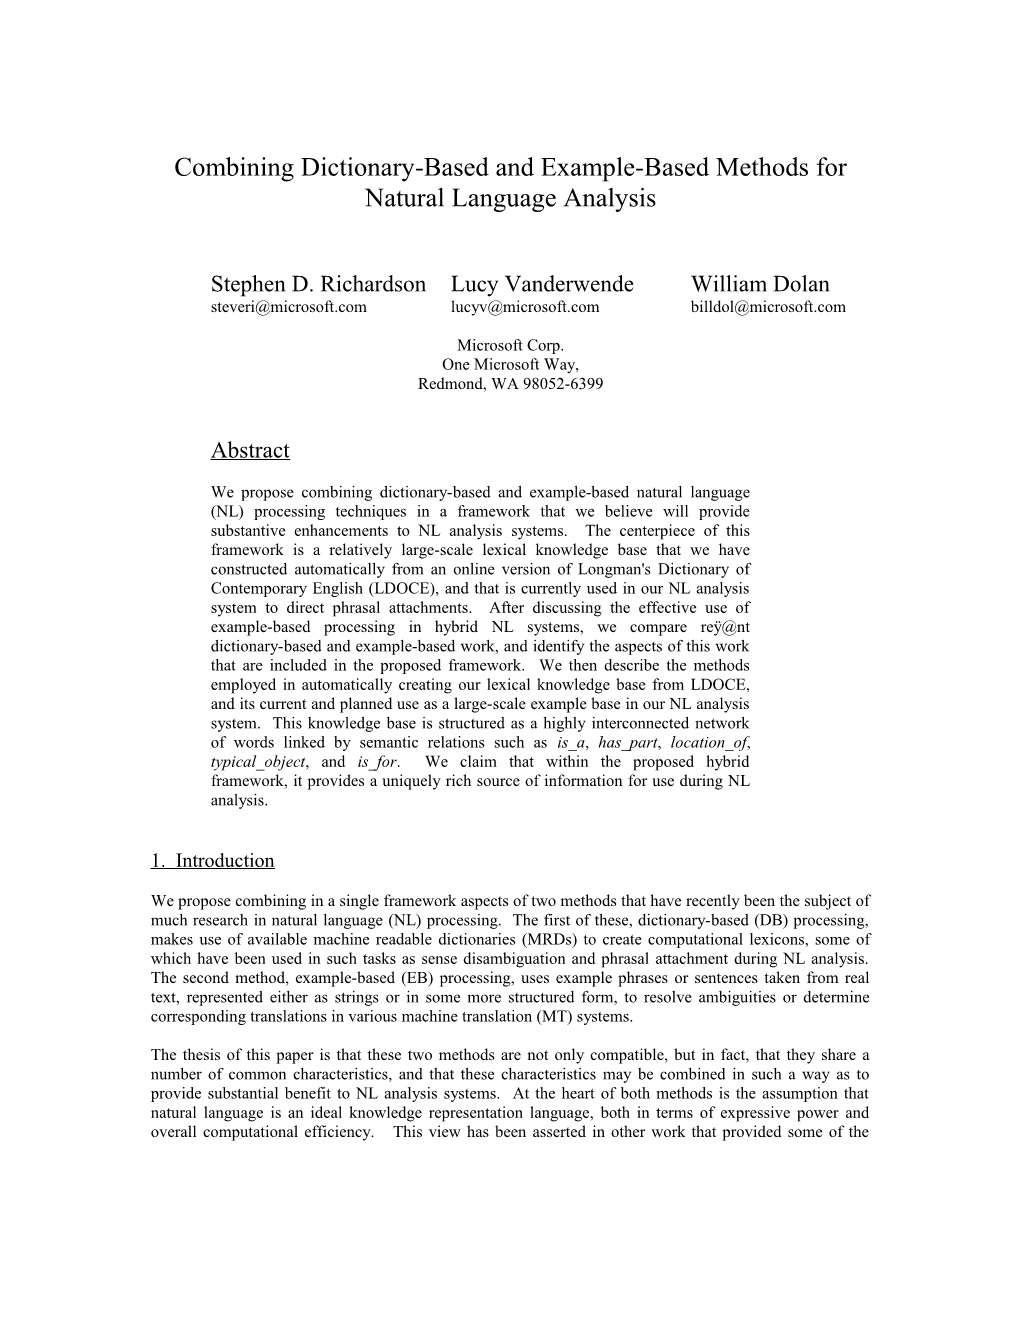 Combining Dictionary-Based And Example-Based Methods For Natural Language Analysis